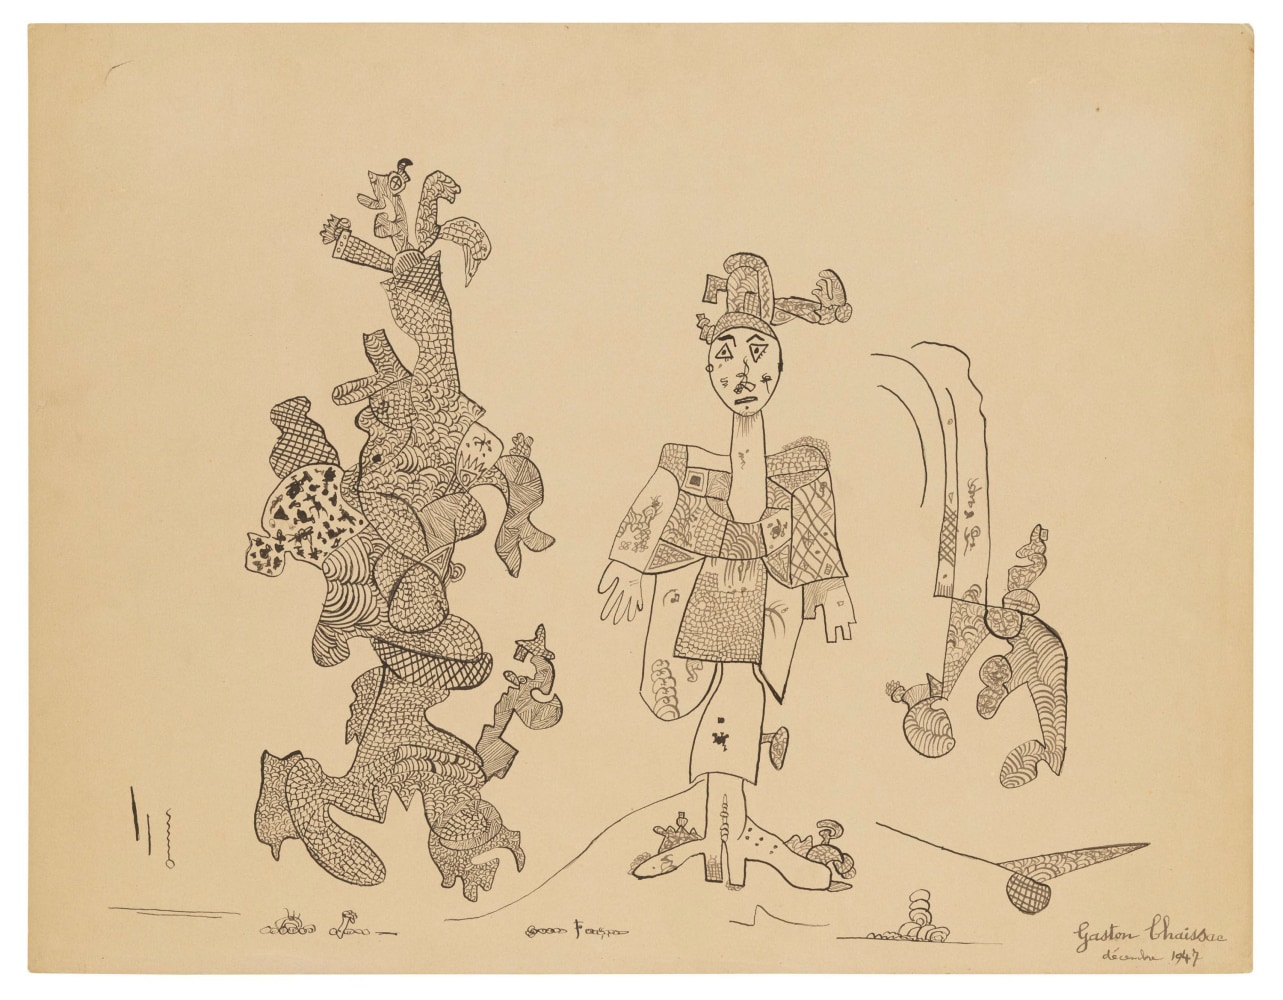 &amp;ldquo;Composition&amp;rdquo;, 1947
India ink on paper
19 3/4 x 25 1/4 inches
50 x 64 cm
CHA 29